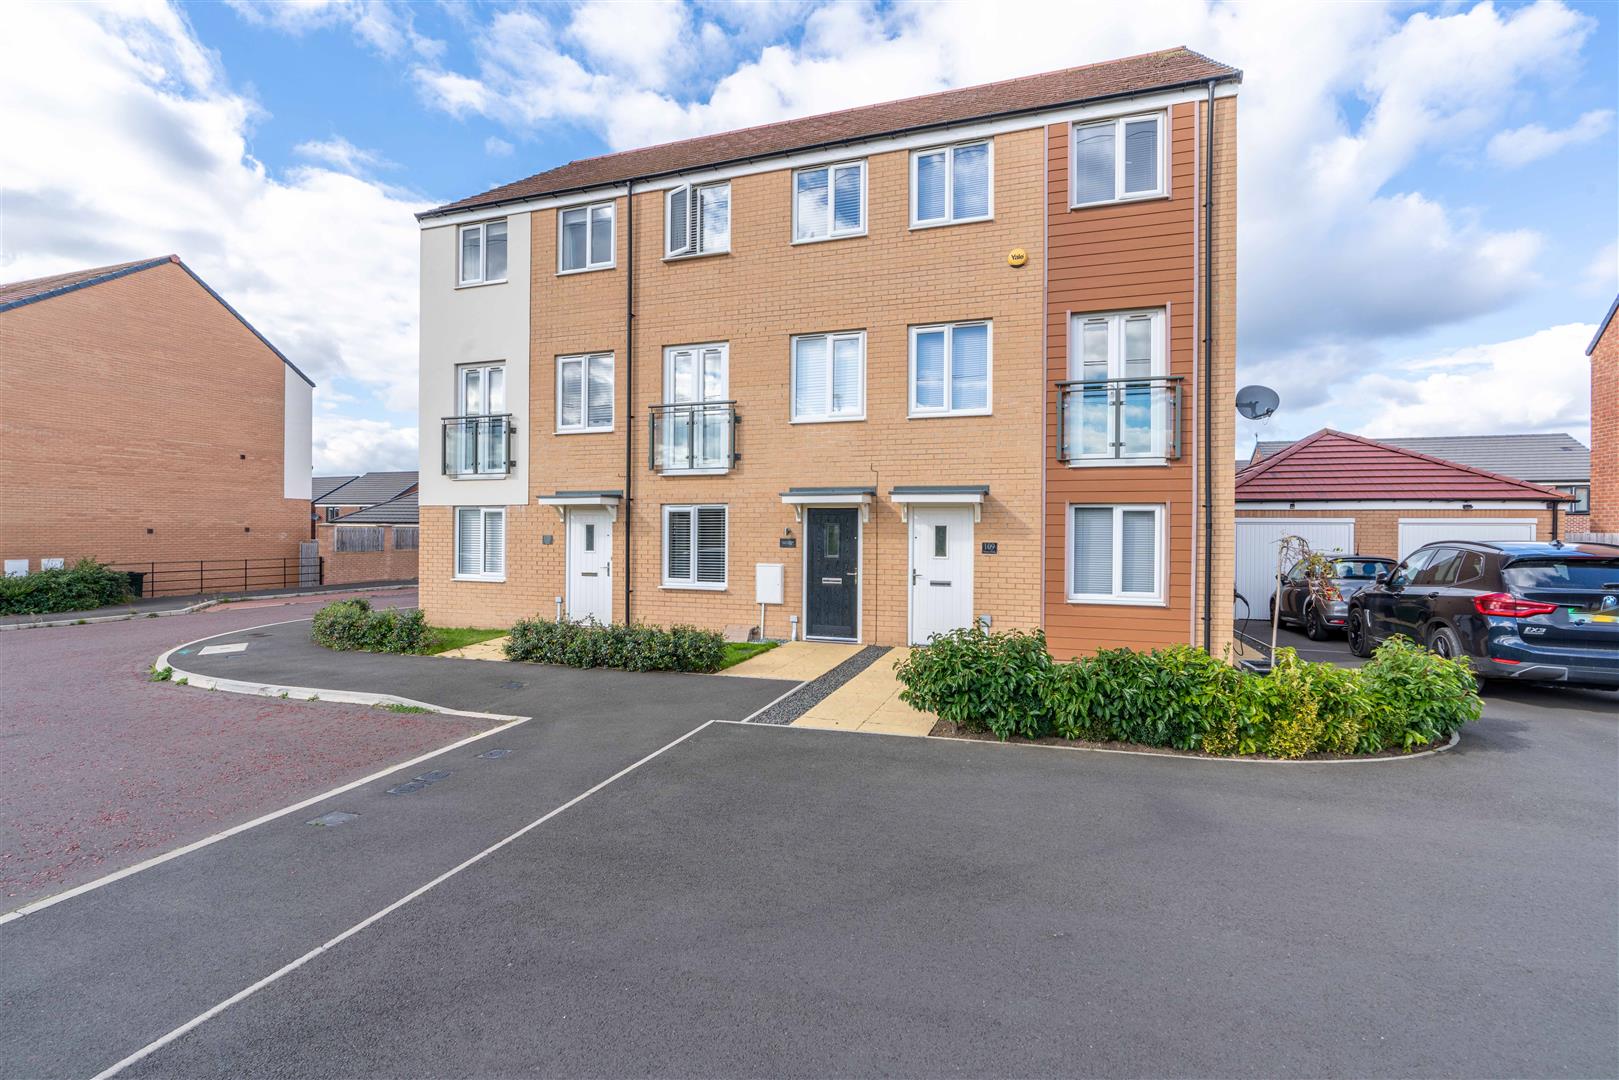 3 bed town house for sale in Osprey Walk, Great Park - Property Image 1